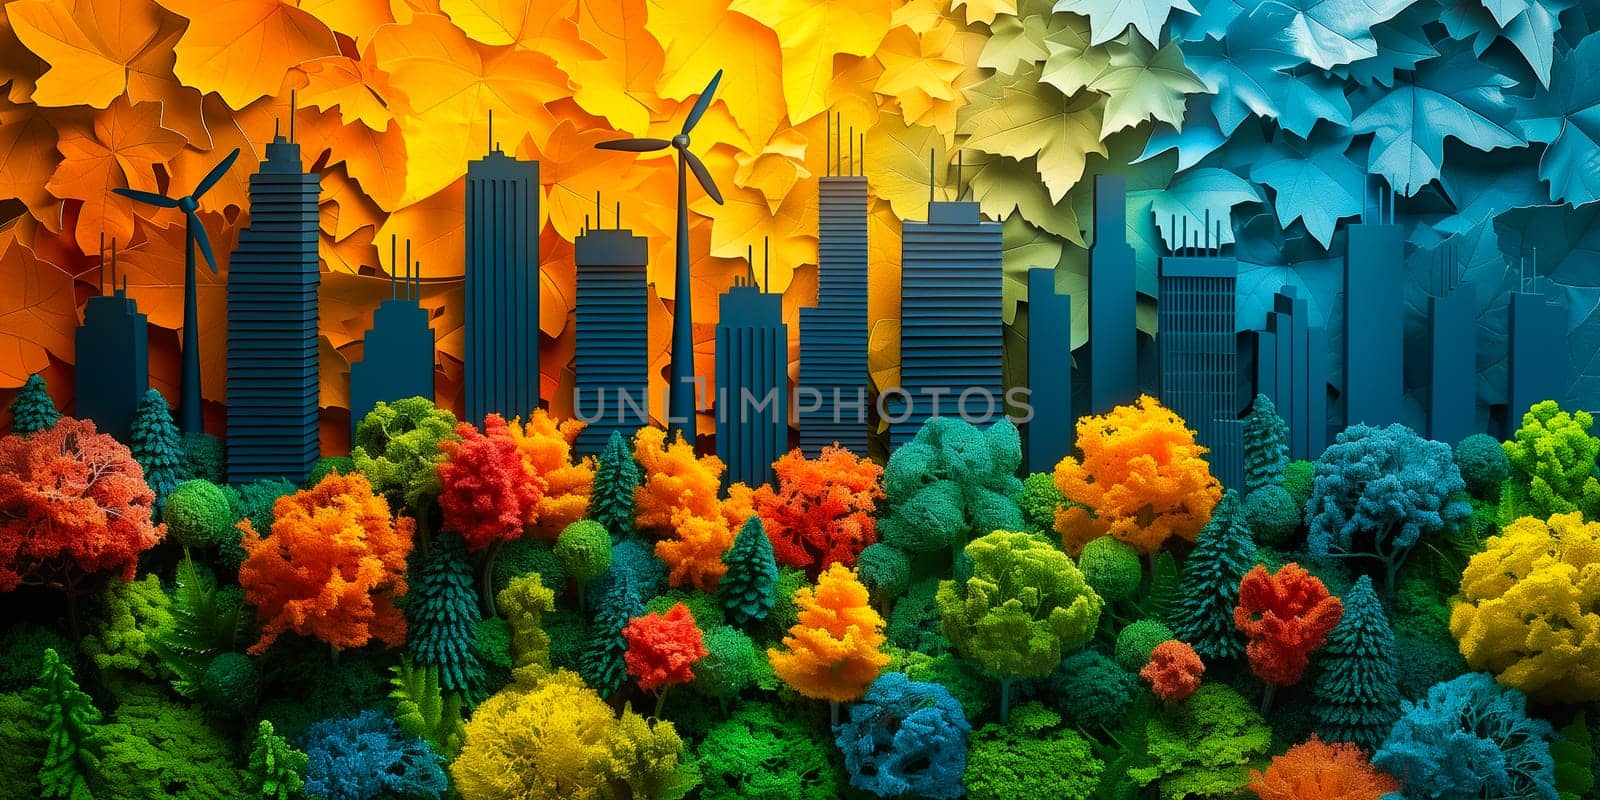 Green industry and alternative renewable energy. Green eco friendly cityscape background. Paper art of ecology and environment concept.